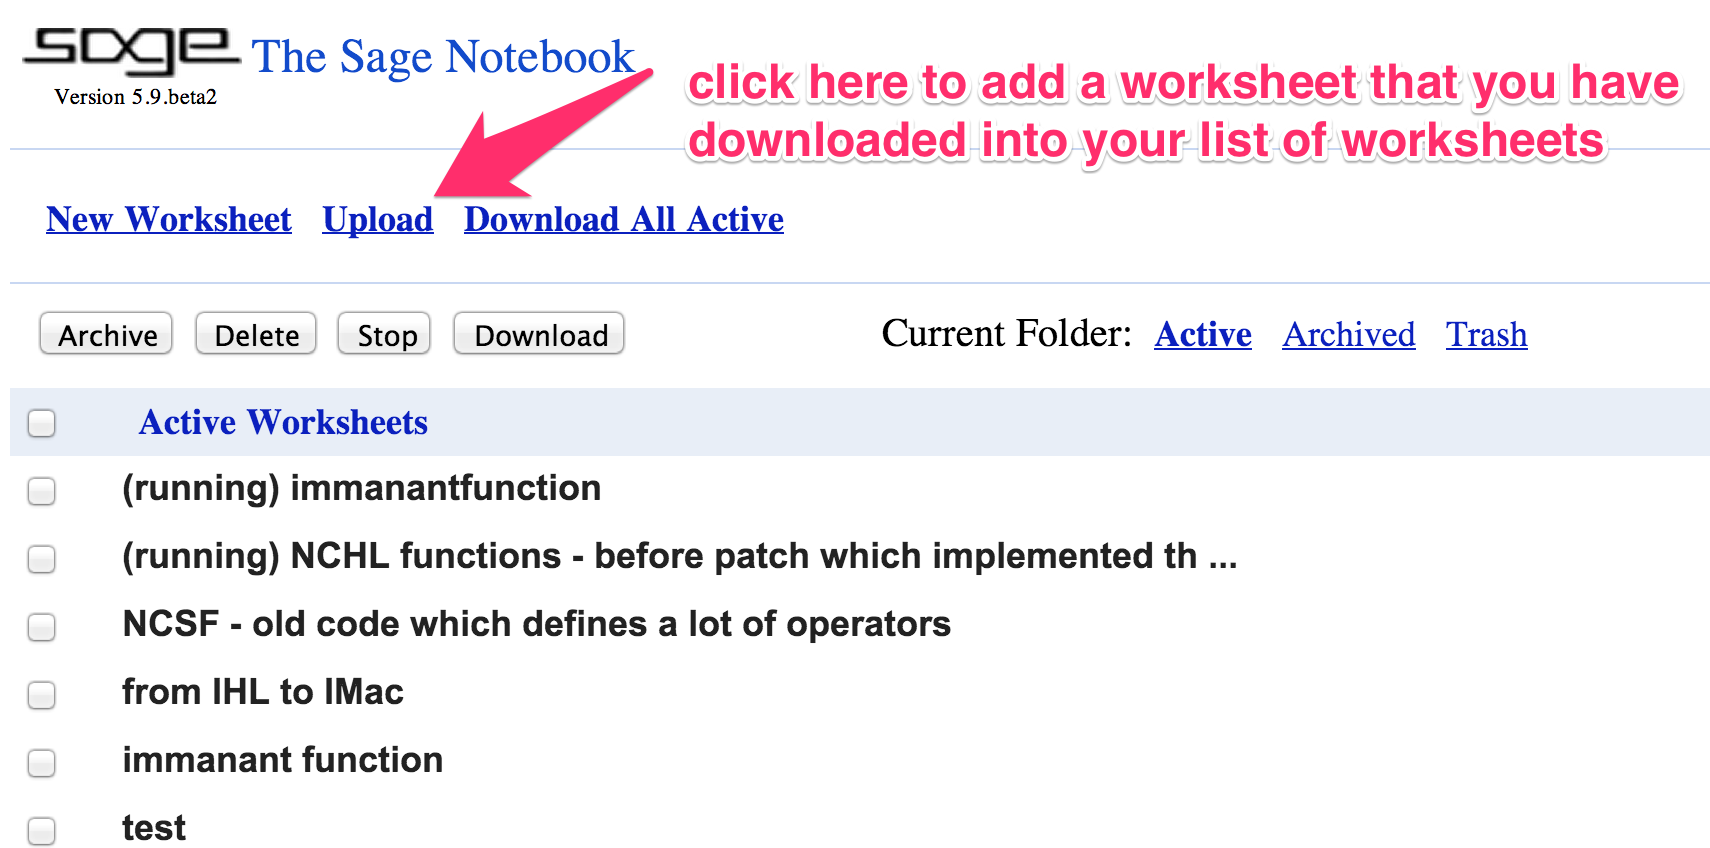 point to where the 'Upload' link is on
        the list of worksheets